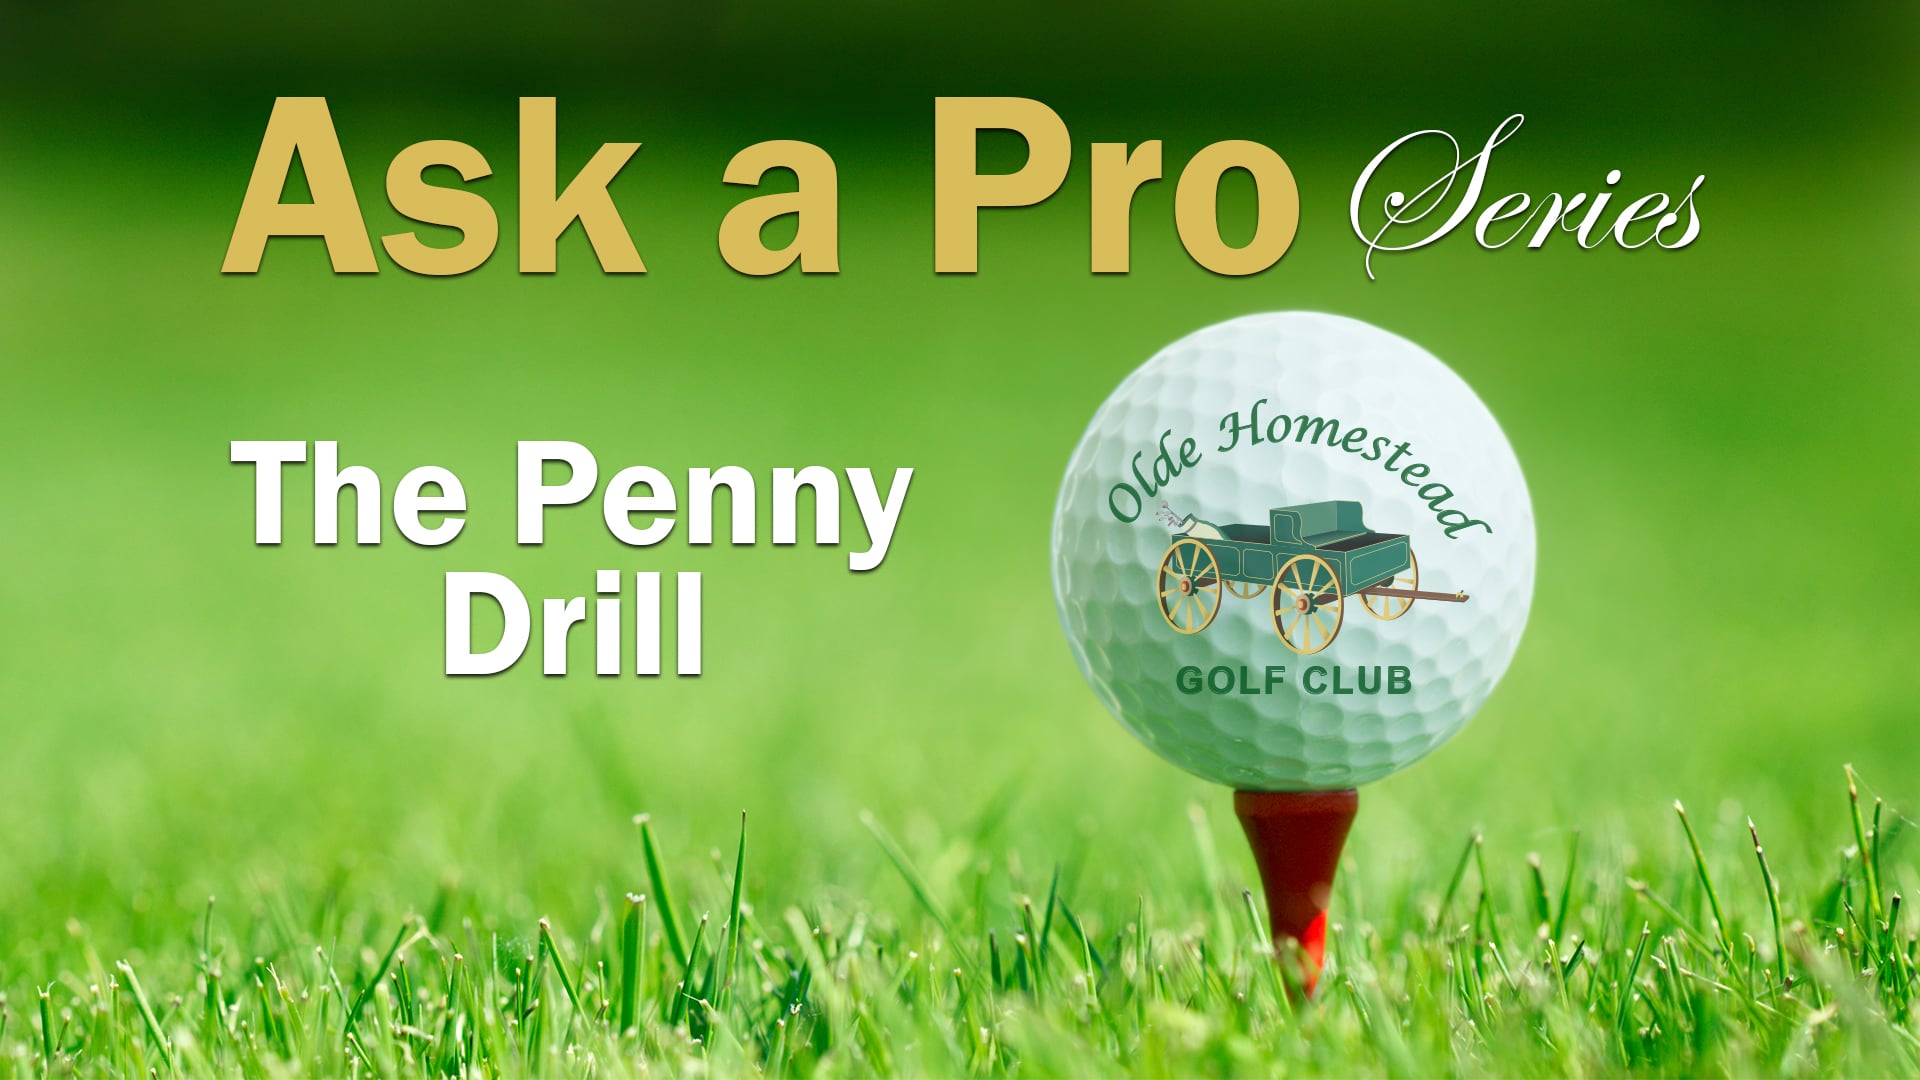 Olde Homestead Golf Club ASK A PRO - Penny Drill